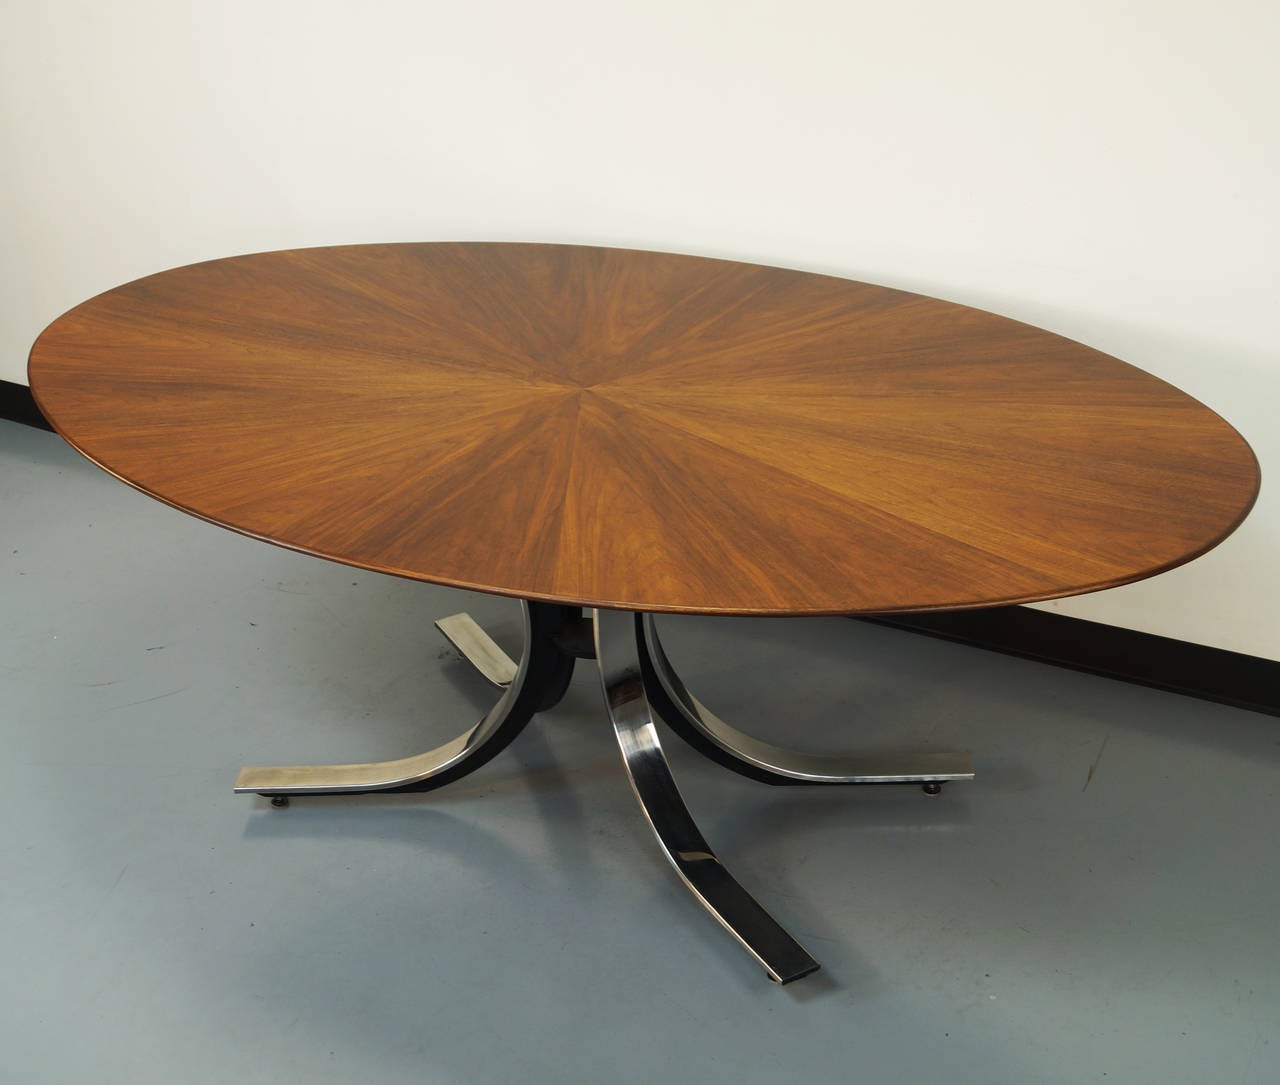 A gorgeous dining table designed by Osvaldo Borsani for Stow Davis. The walnut top veneer features a sophisticated starburst pattern with a stainless steel base. Top has recently been refinished.